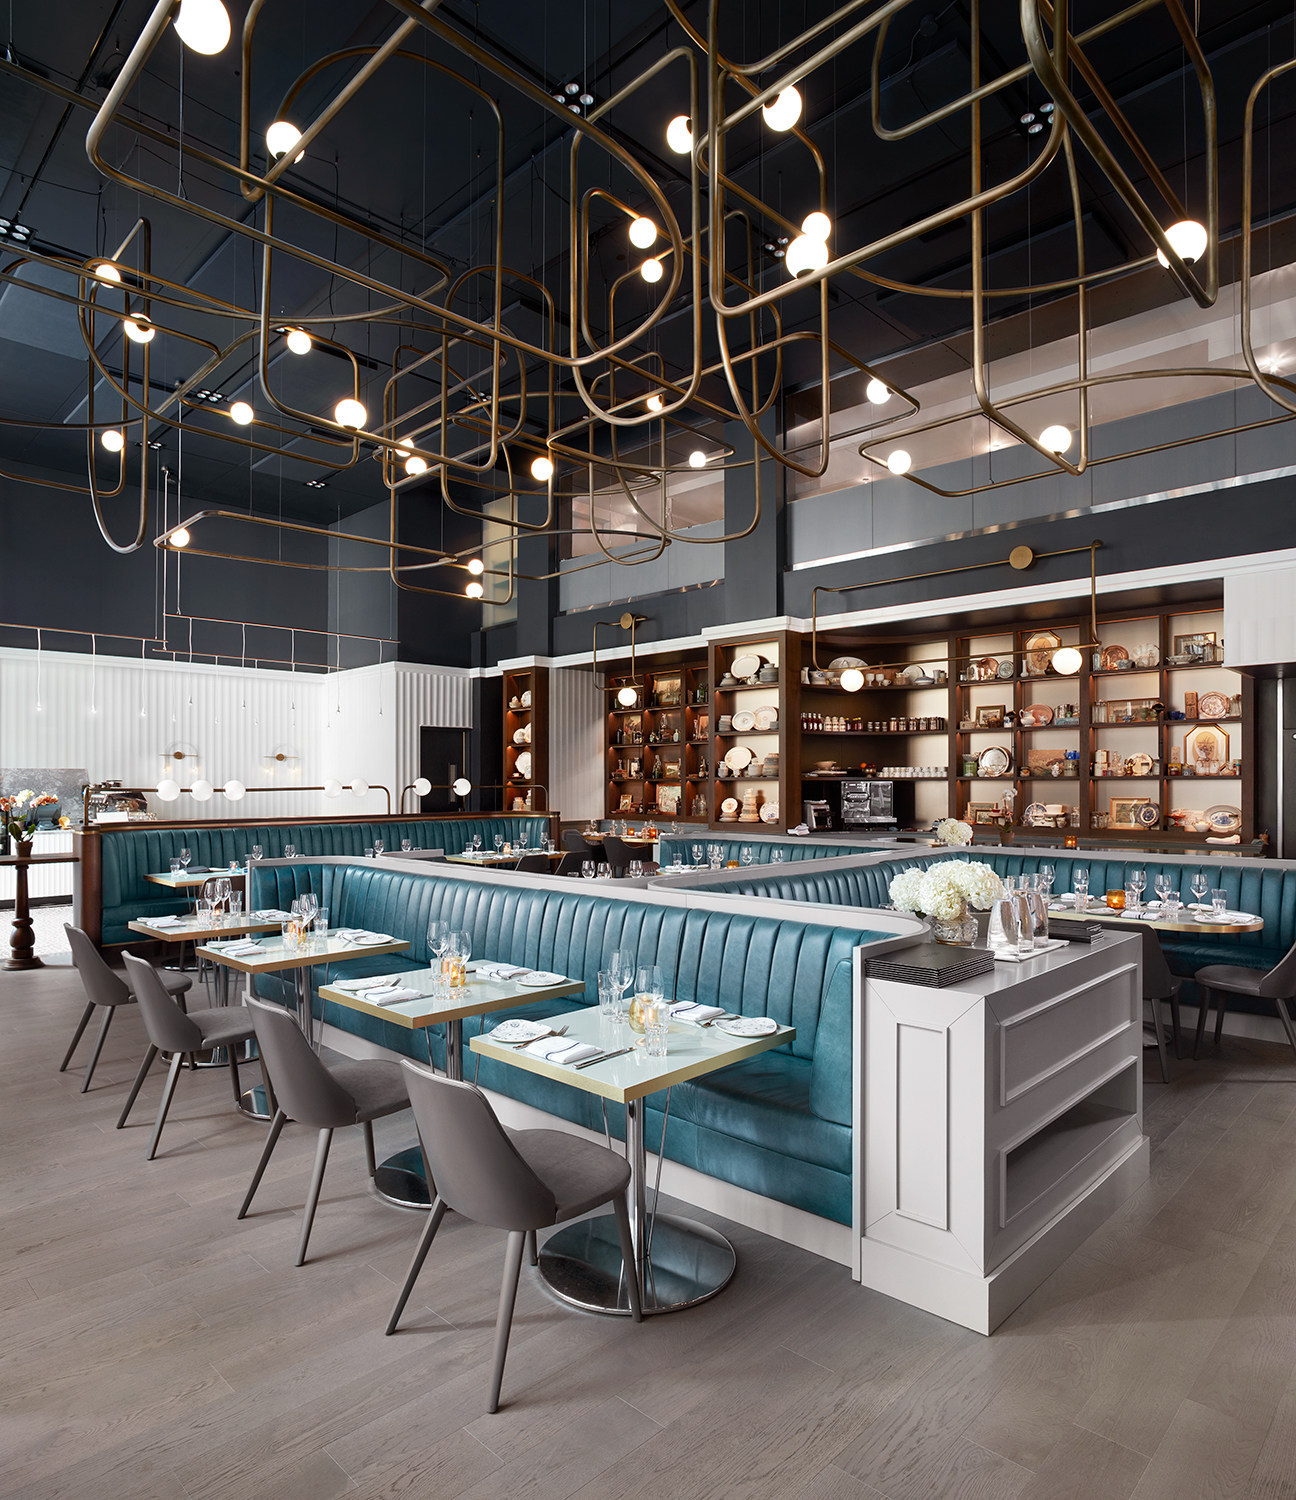 Groupe Germain-Le Germain Hotel Toronto Introduces Restyled Vict